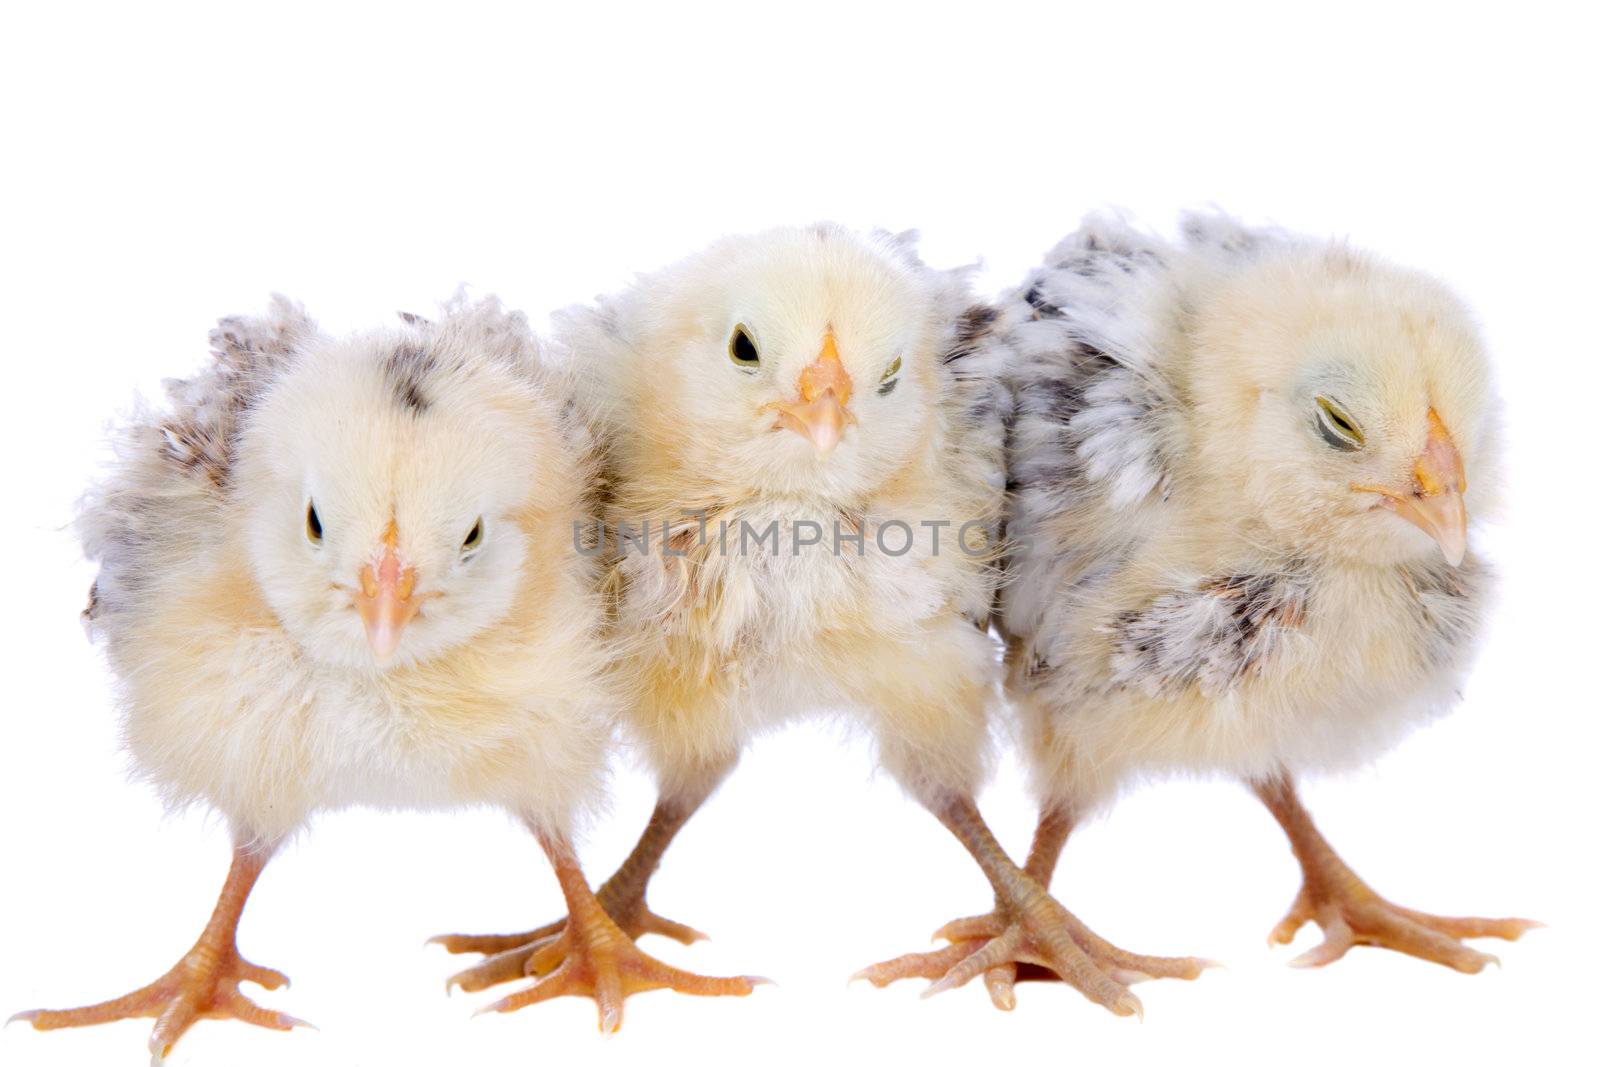 Three cute little chickens standing in a row on white background